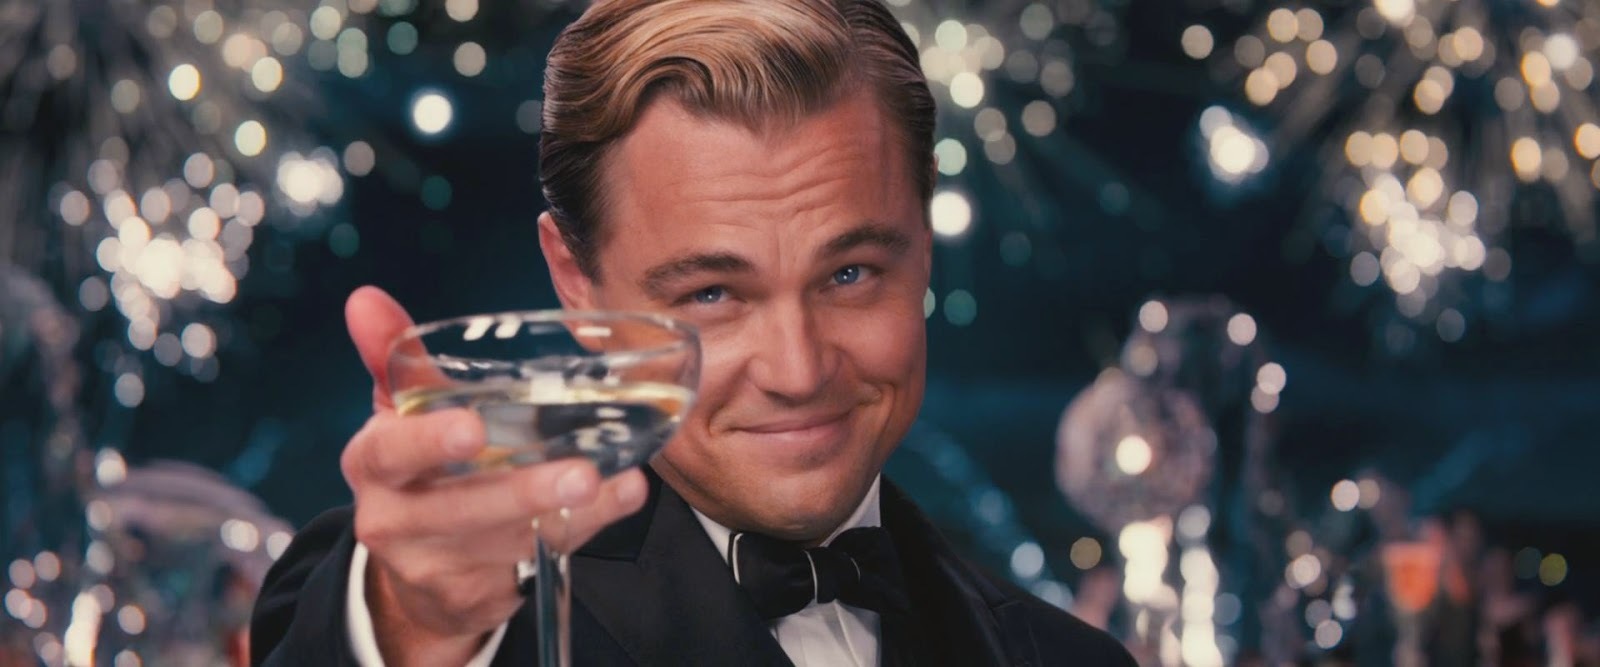 Leo knows how to rest well - Leonardo DiCaprio, Actors and actresses, Celebrities, Meeting, Screenshot, Twitter, Night club, Memes, 